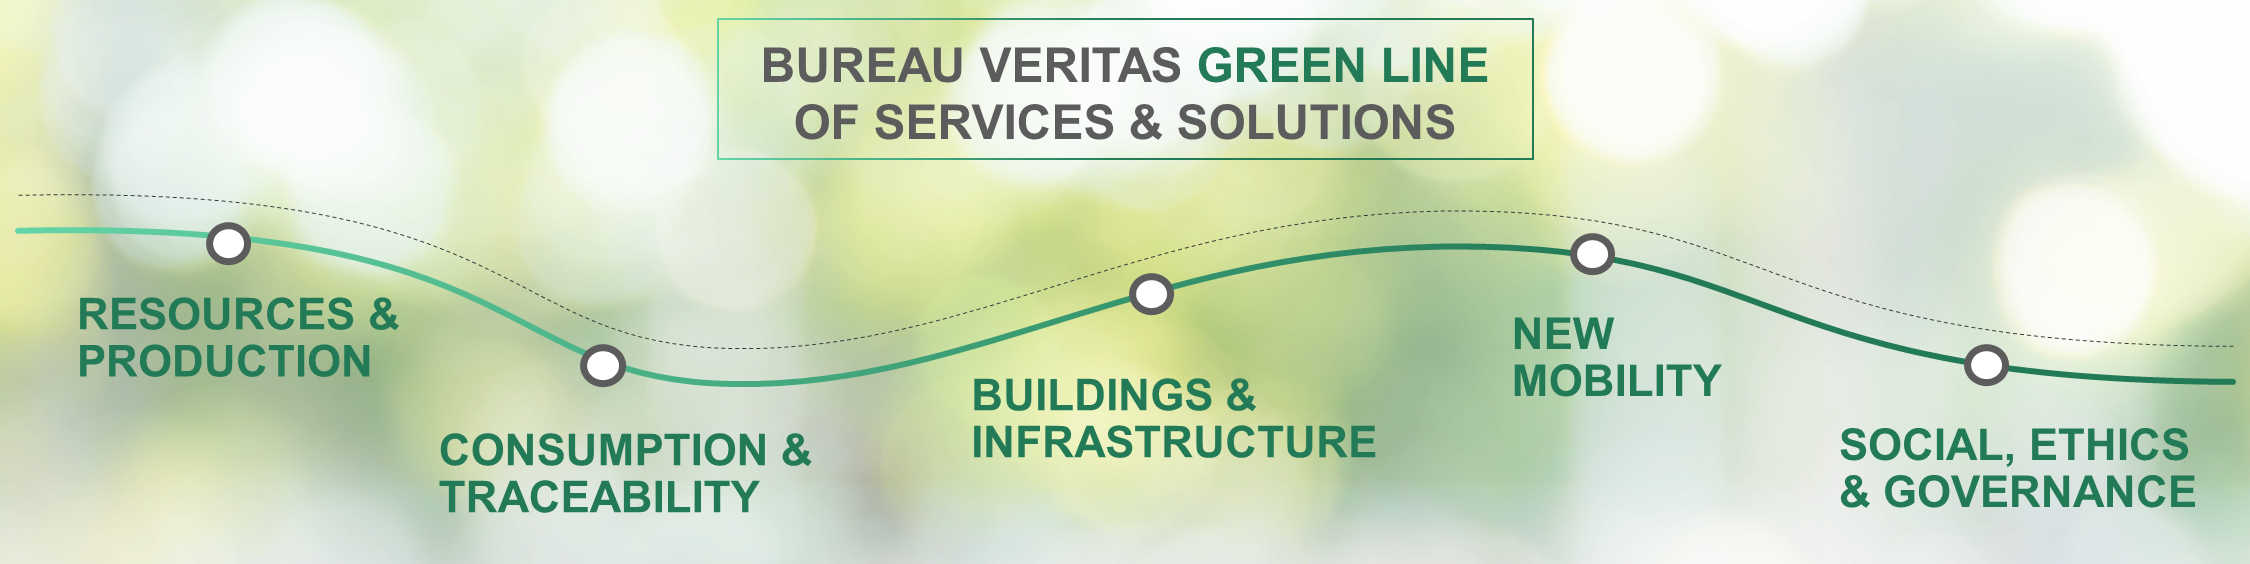 GreenLine Services ans solutions 